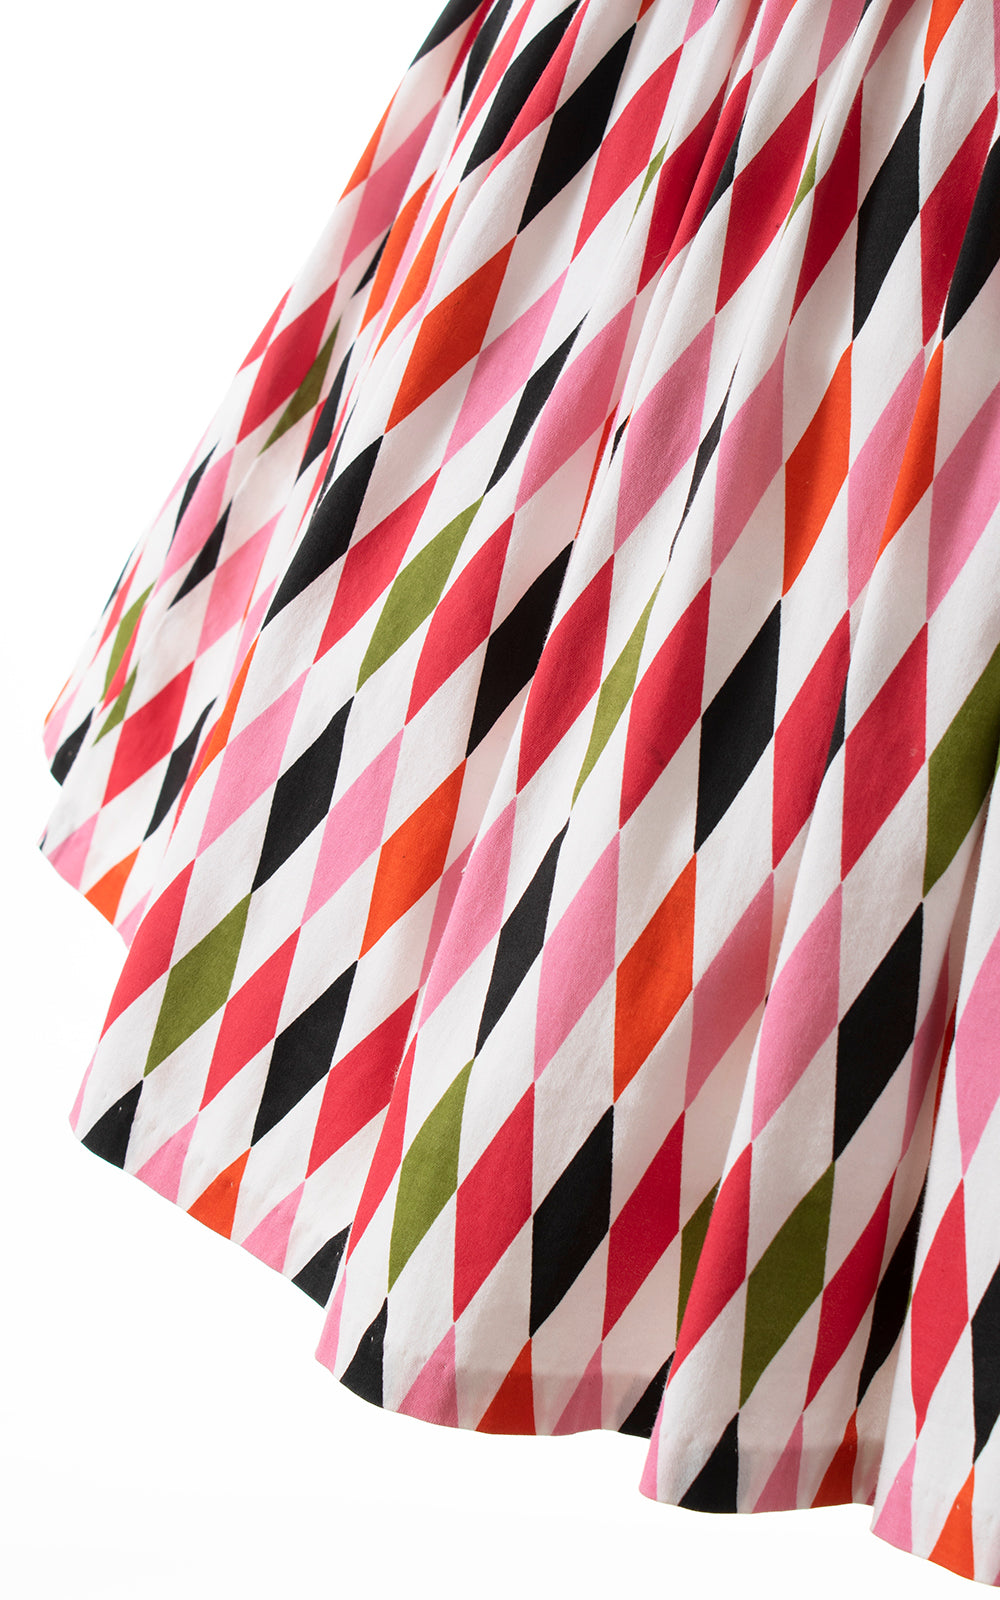 Modern PIN UP GIRL 1950s Style Harlequin Skirt with Pockets | small